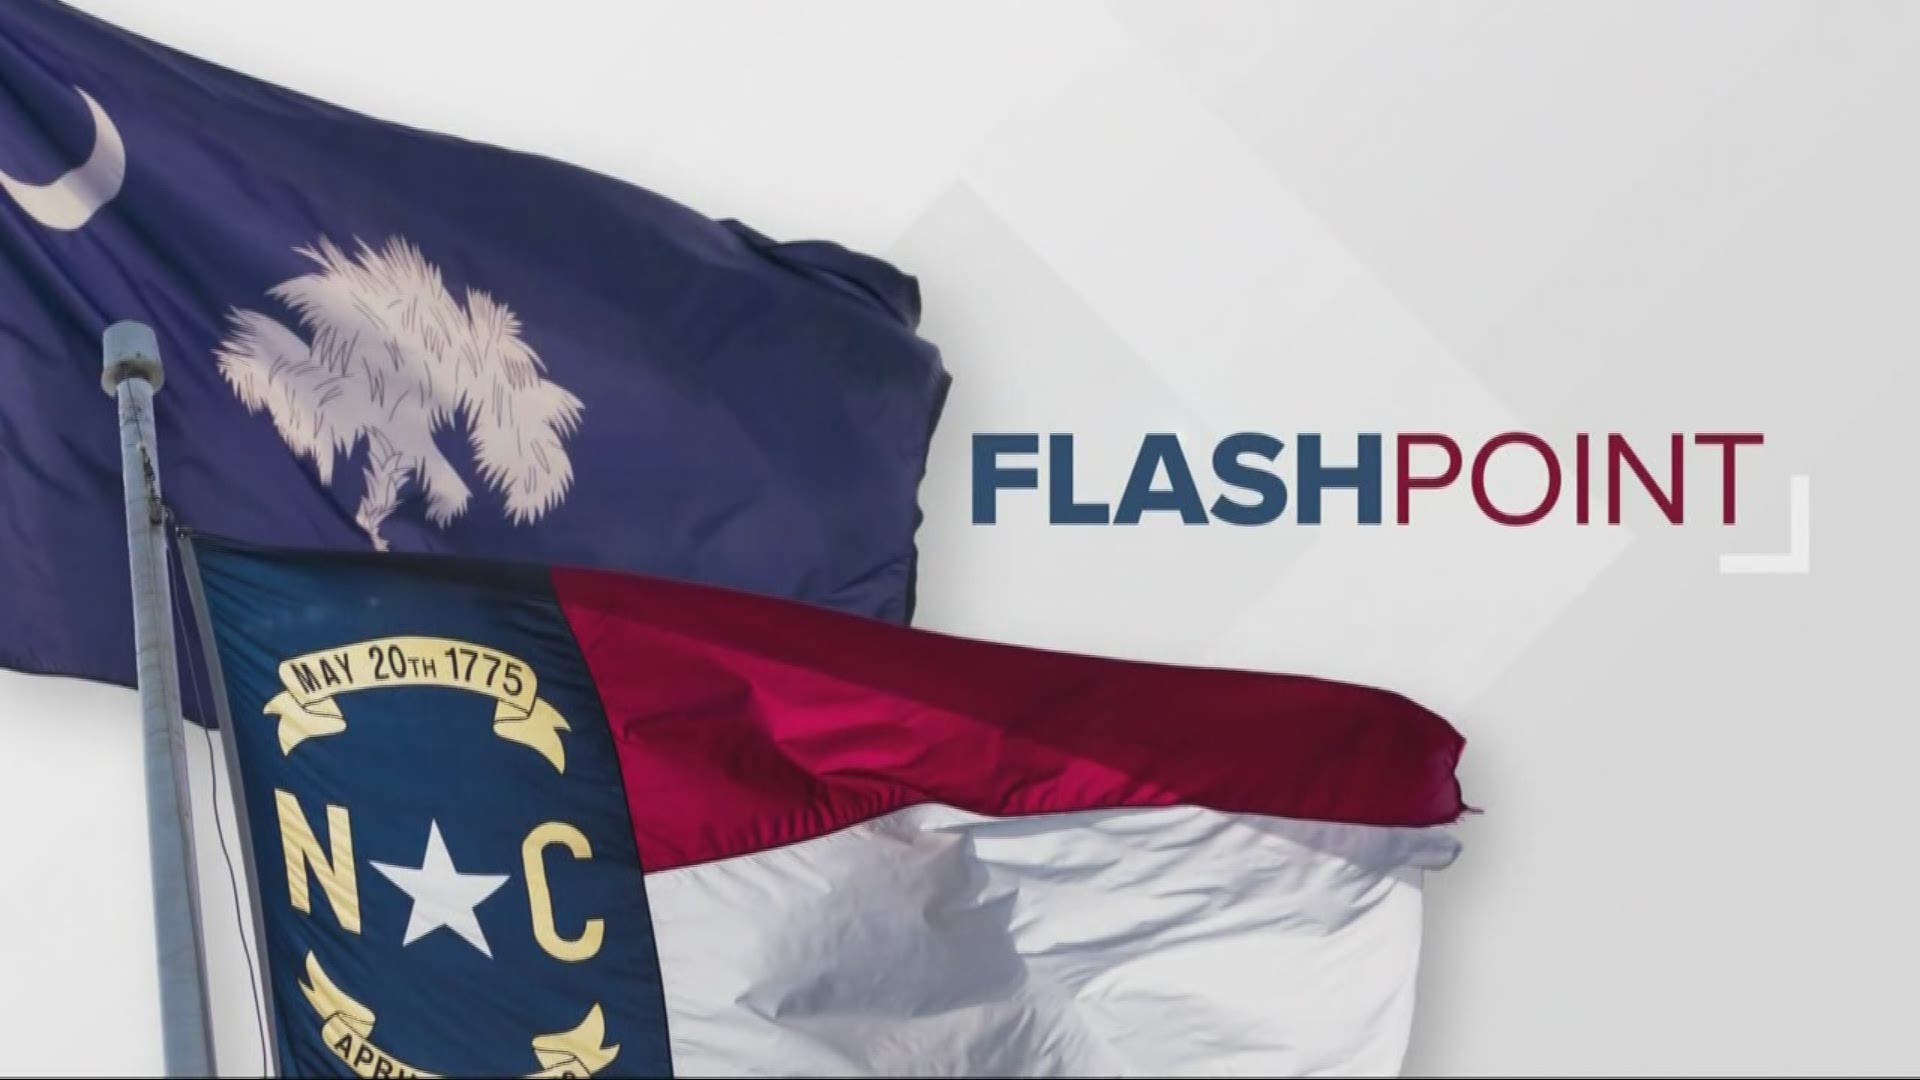 Flashpoint 7/5: North Carolina congresswoman, Alma Adams joins Ben Thompson to discuss the first months of 2020.